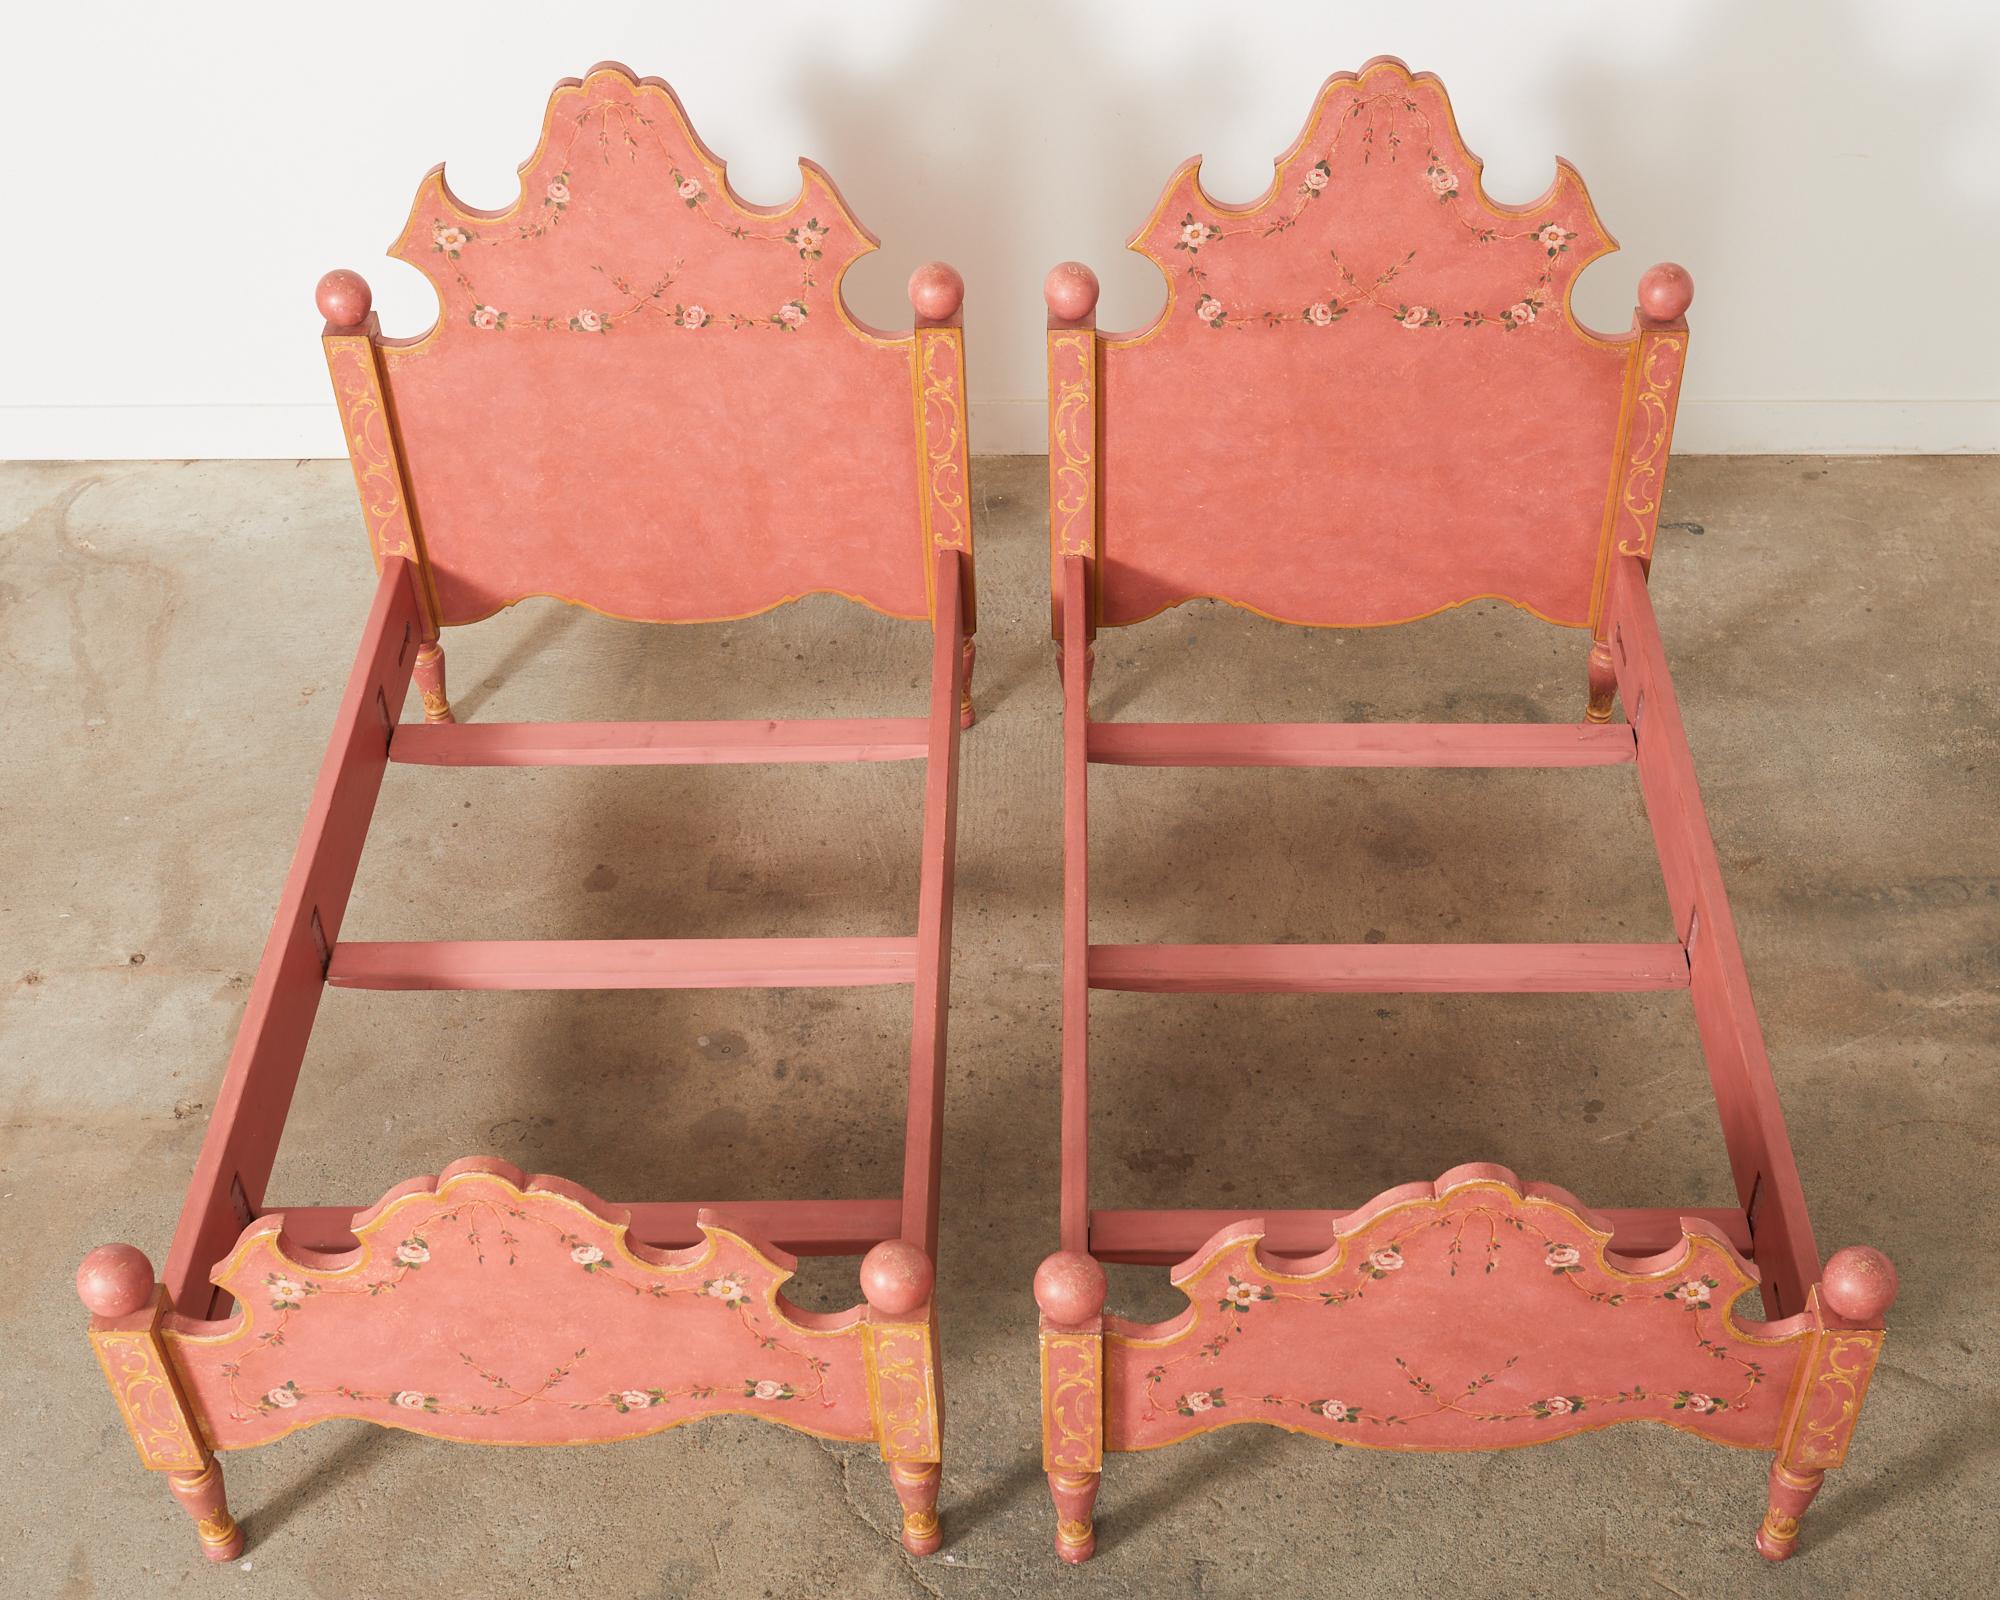 20th Century Pair of Italian Venetian Style Hand-Painted Twin Beds